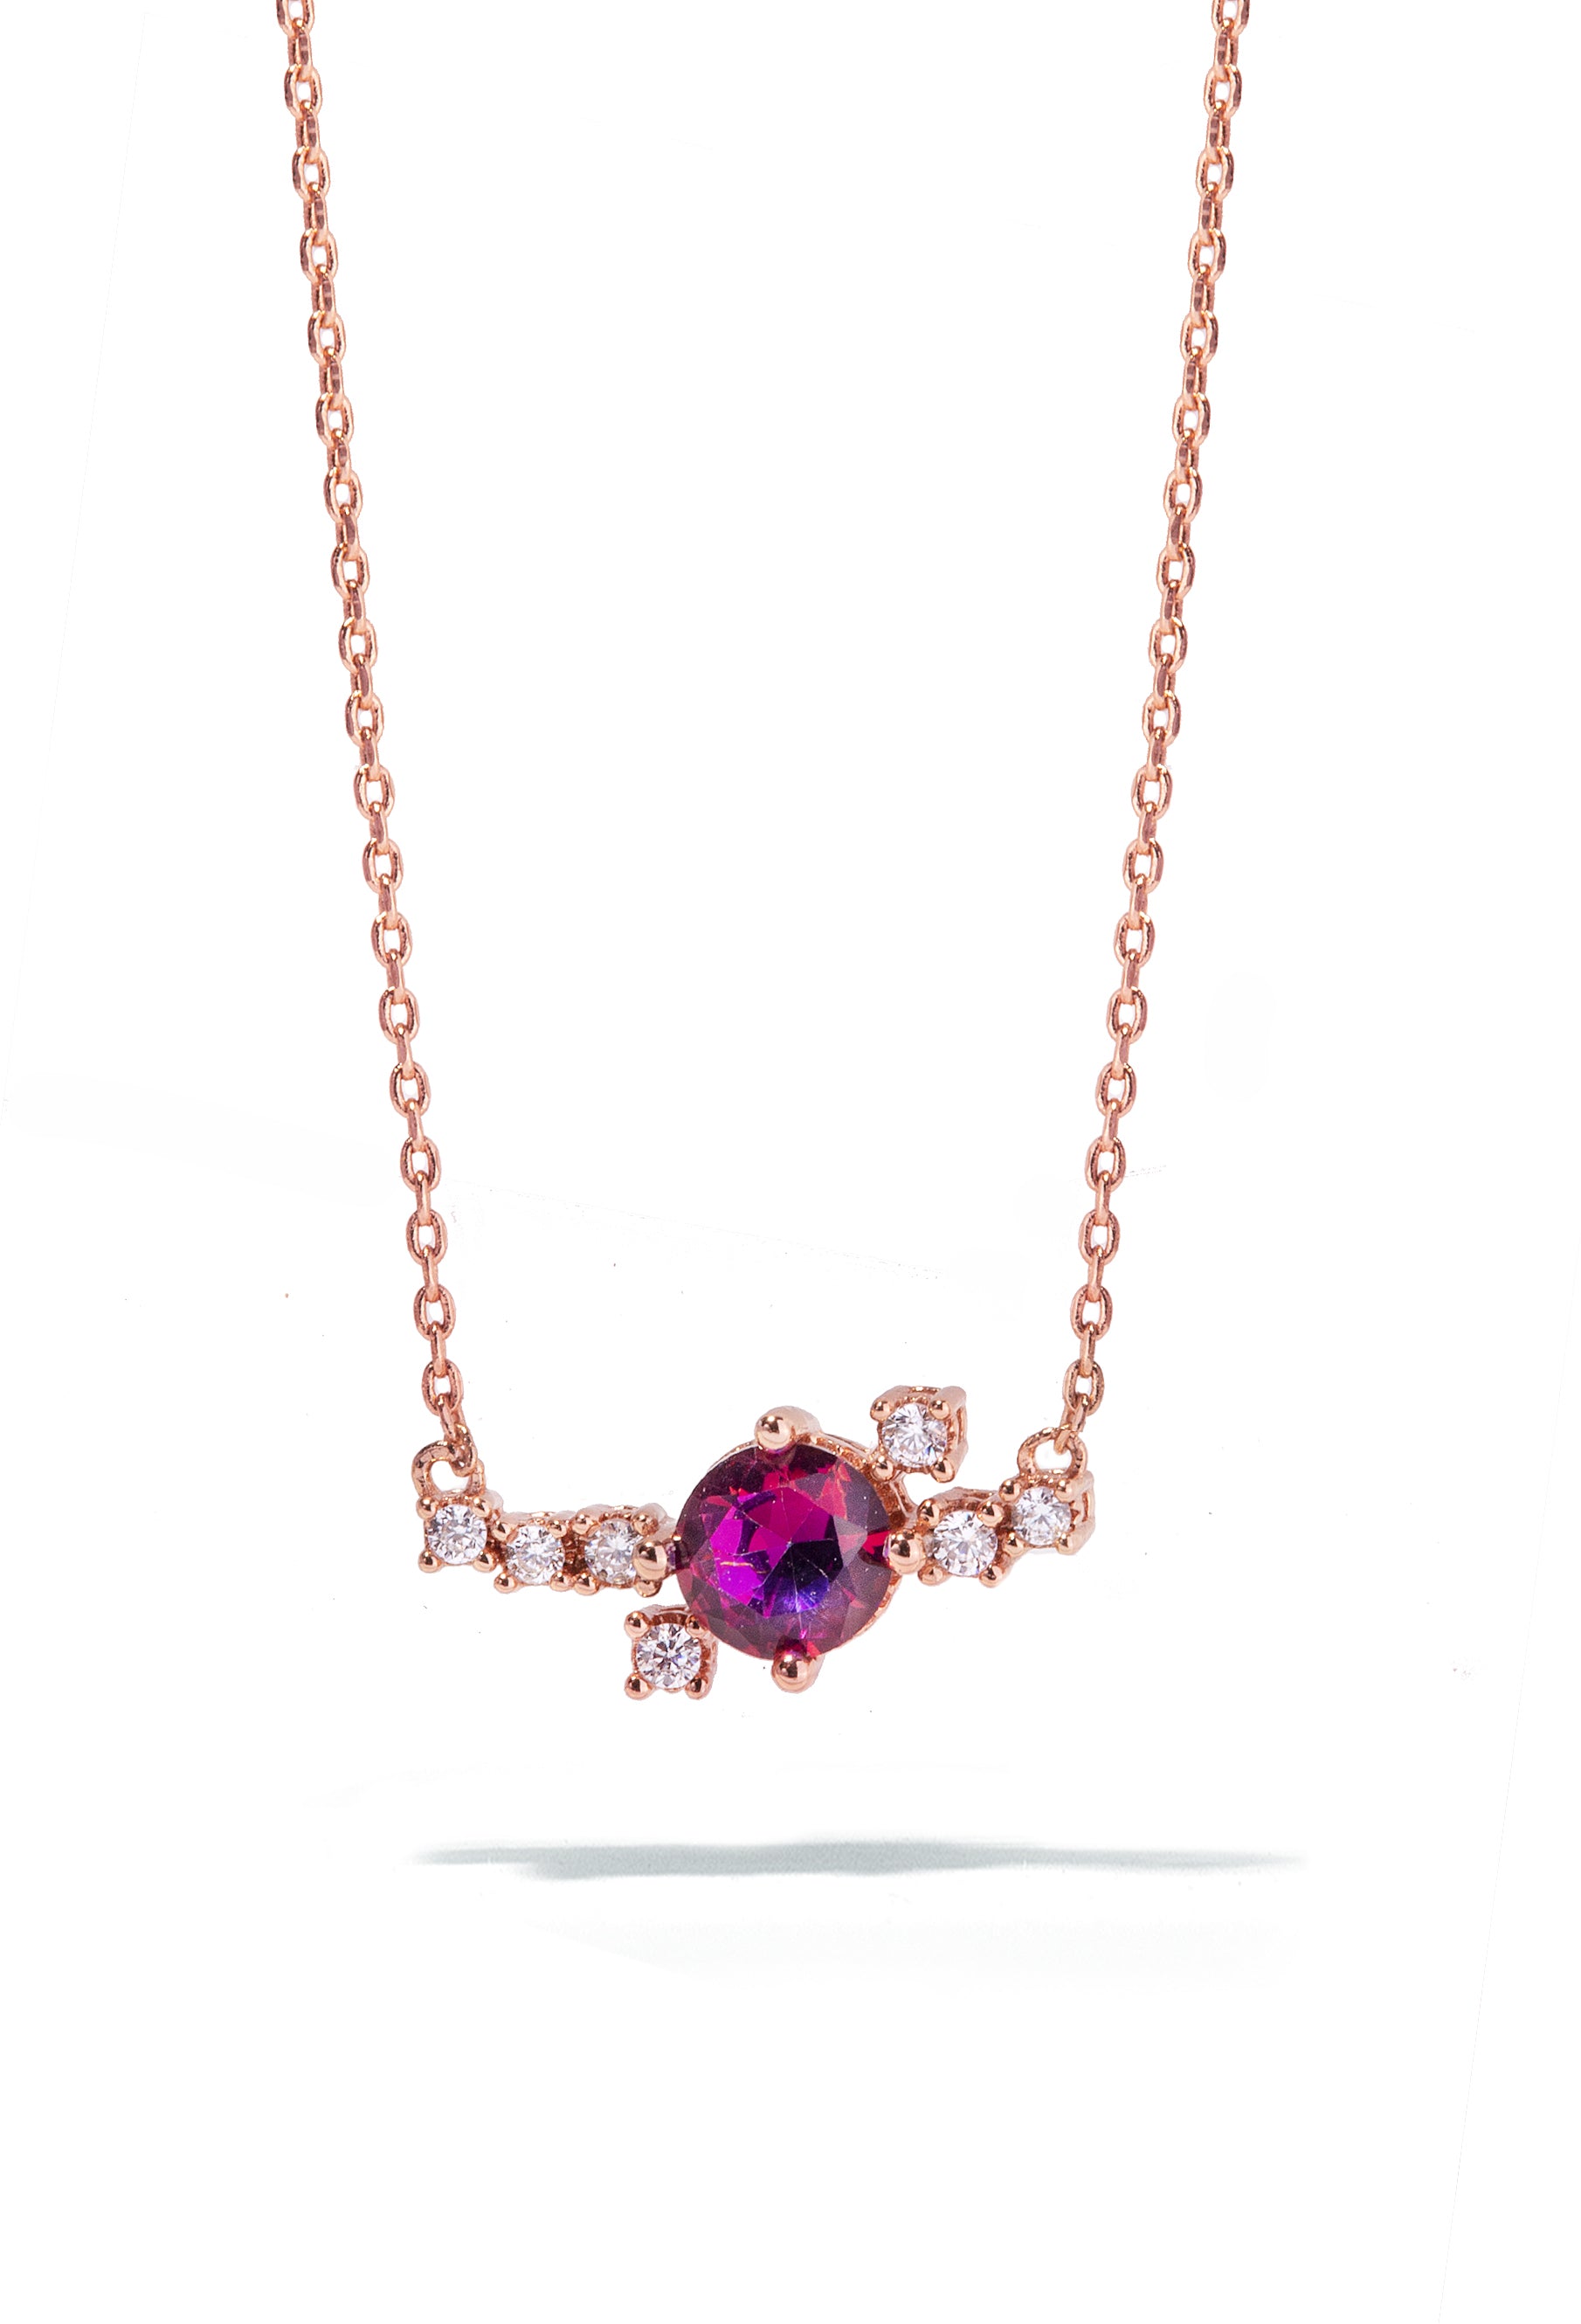 Rose Gold Necklace w/ Iridescent Crystal | Burlesque by Oomiay – Oomiay ...